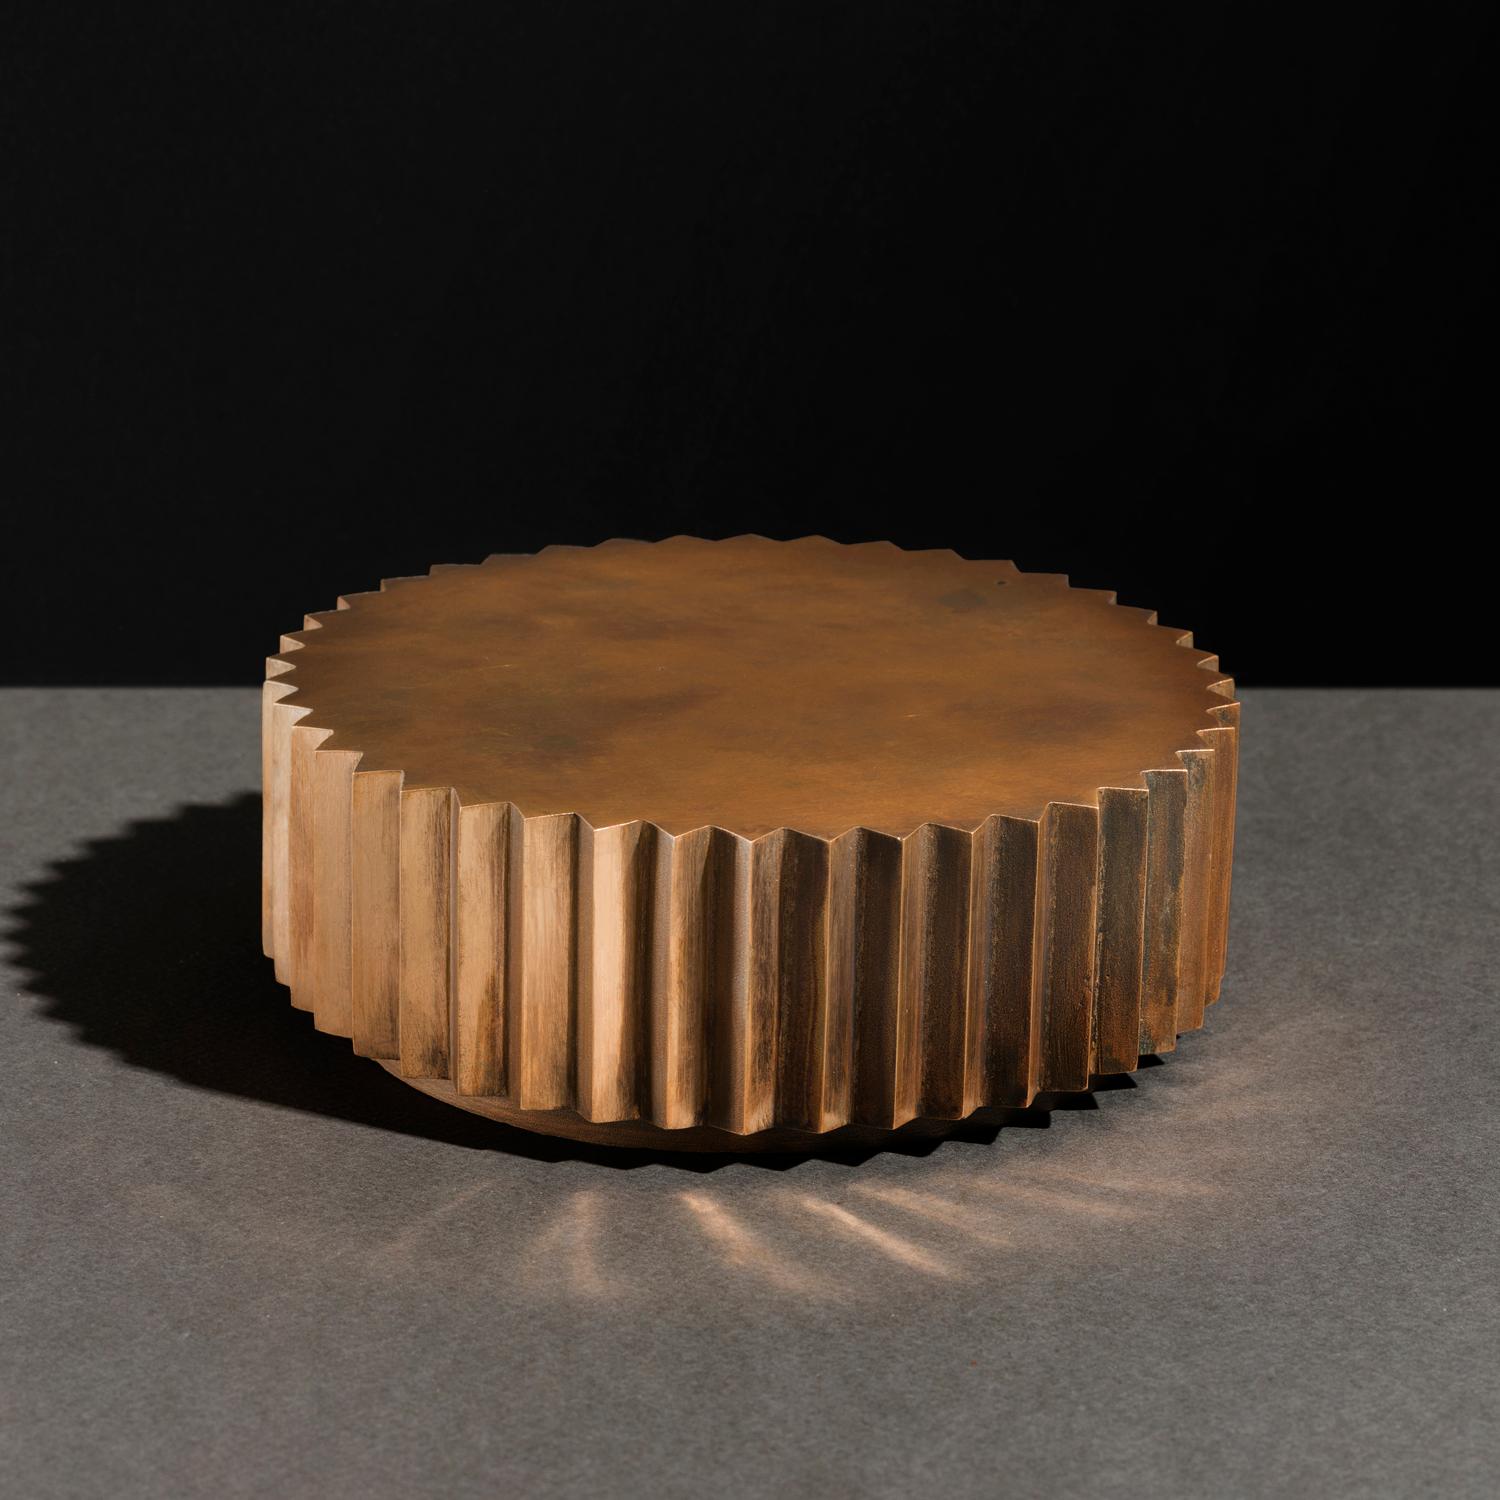 Doris Bronze Low Coffee Table by Fred and Juul
Dimensions: Ø 84 x H 30 cm.
Materials: Bronze.

Available in bronze and aluminum. Also available in different measurements. Custom sizes, materials or finishes are available. Please contact us.

Side